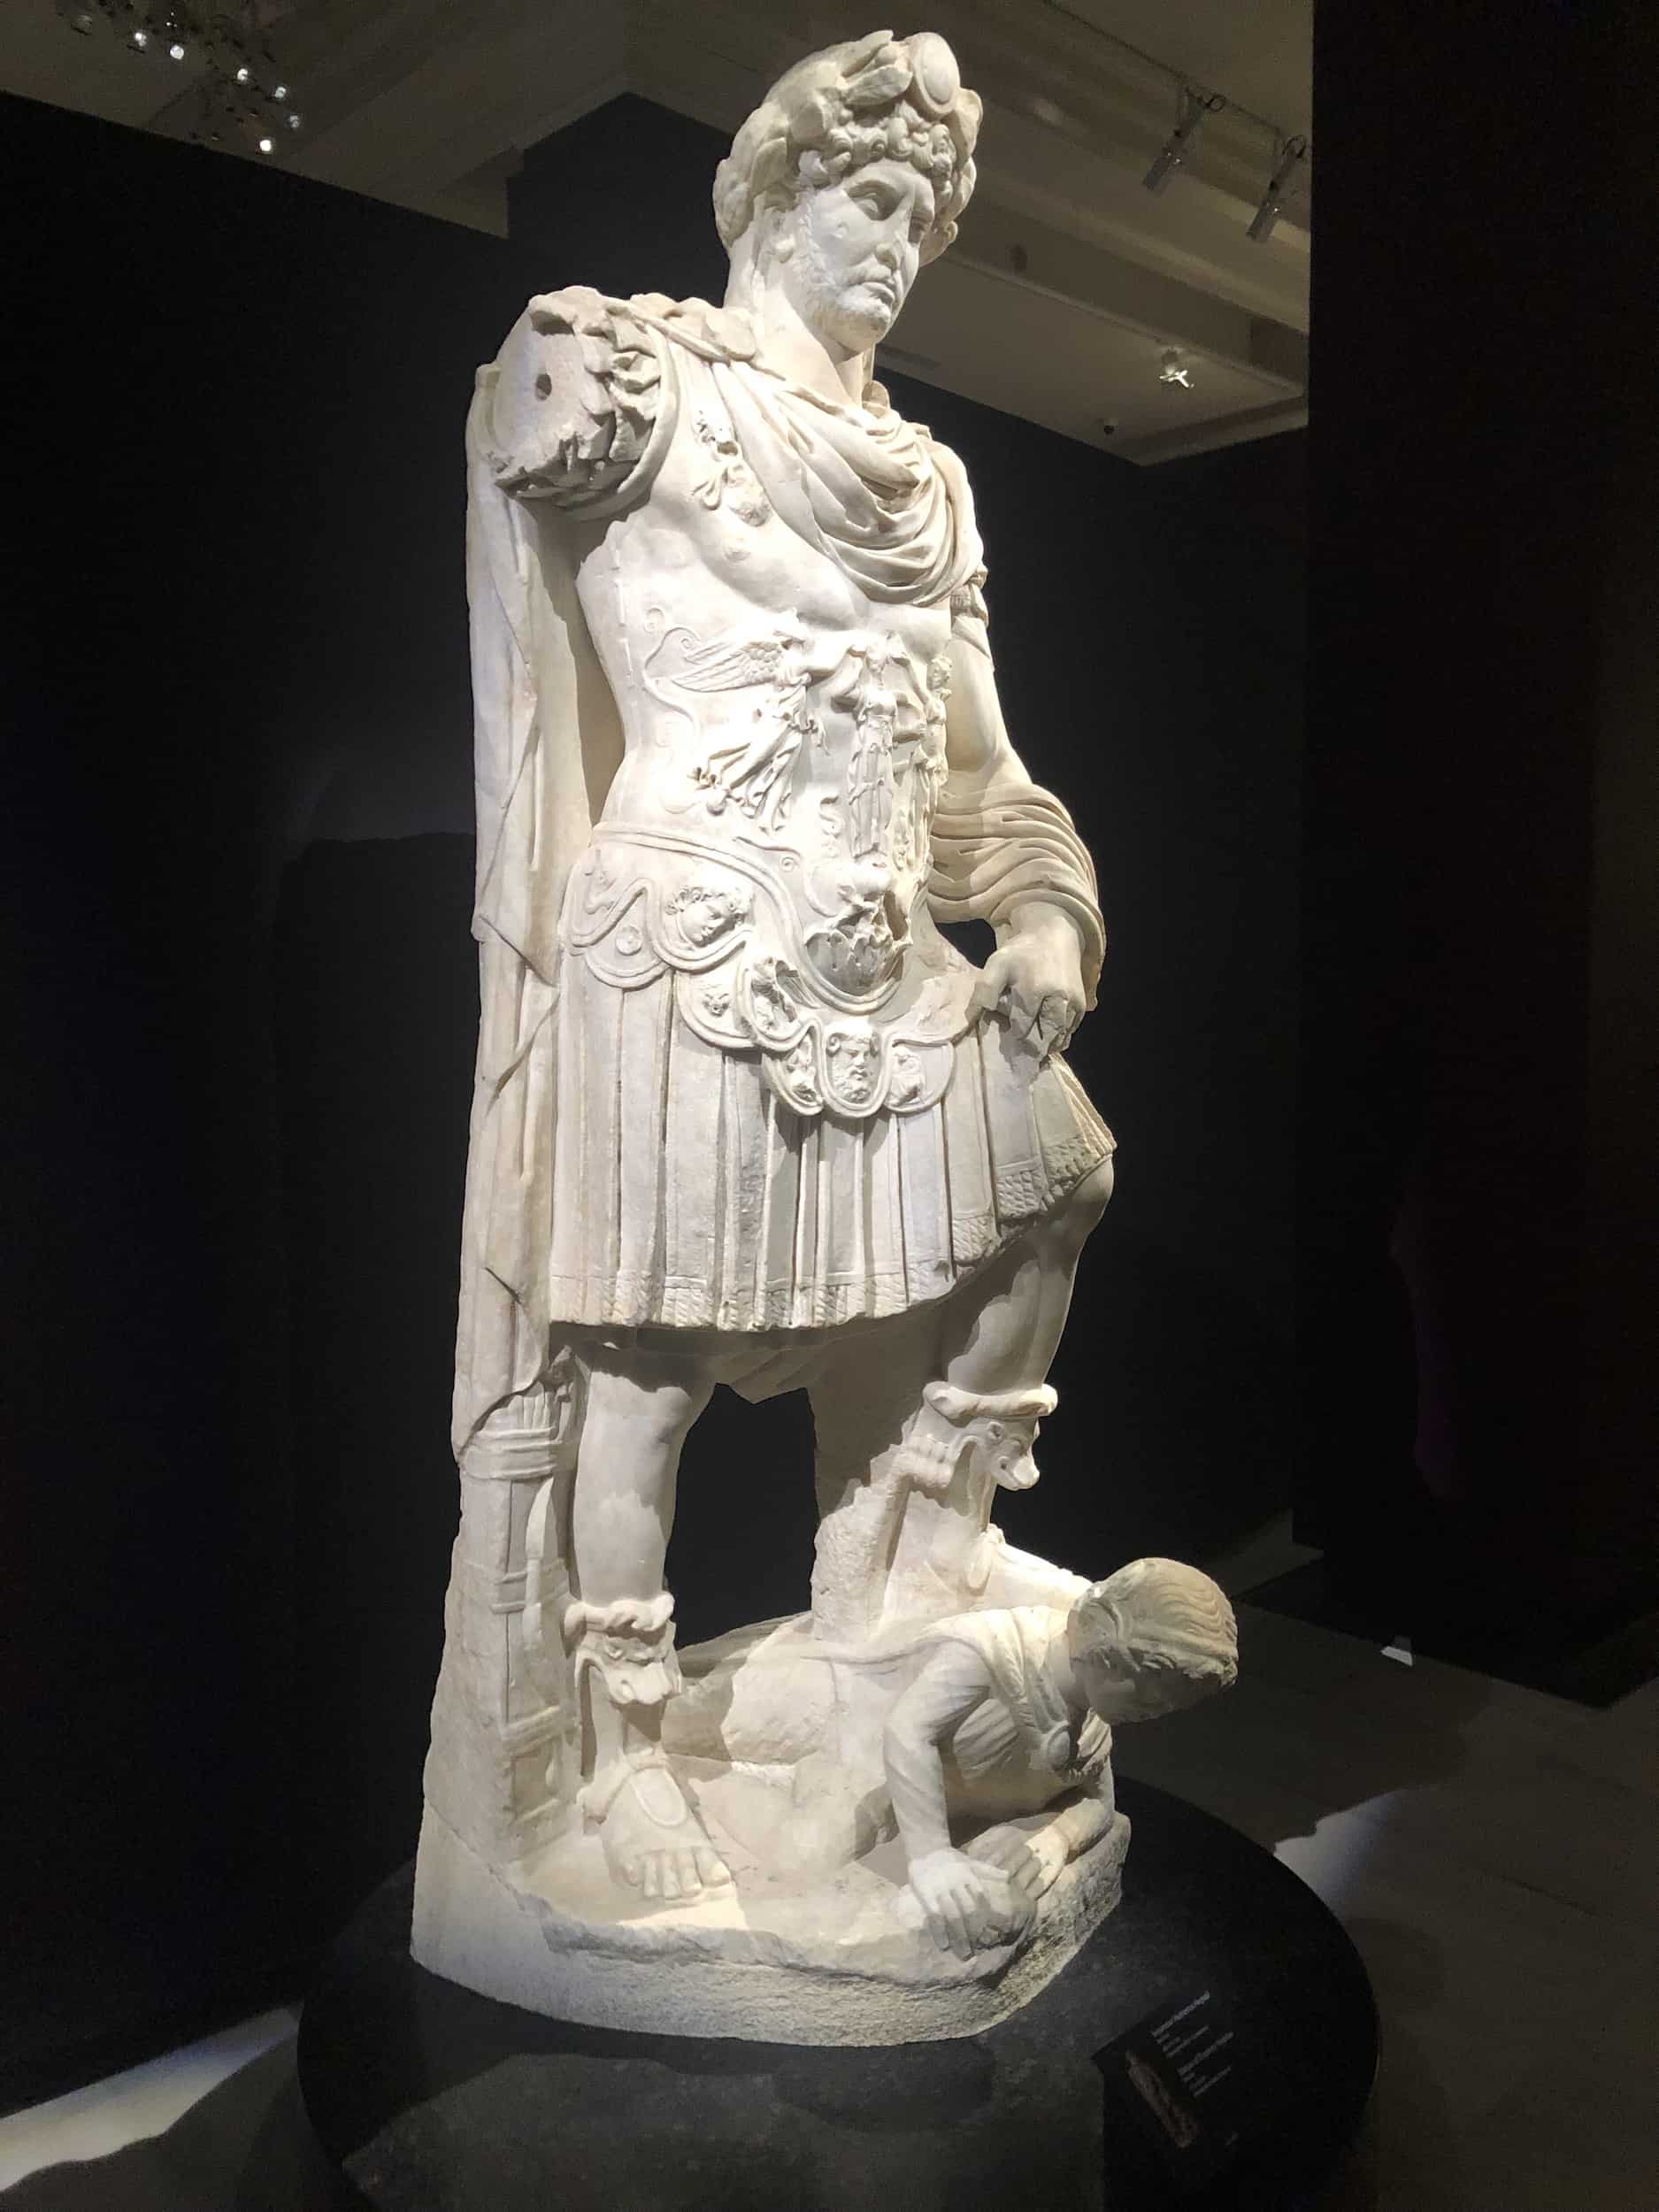 Statue of a Roman emperor at the Istanbul Archaeology Museum in Istanbul, Turkey